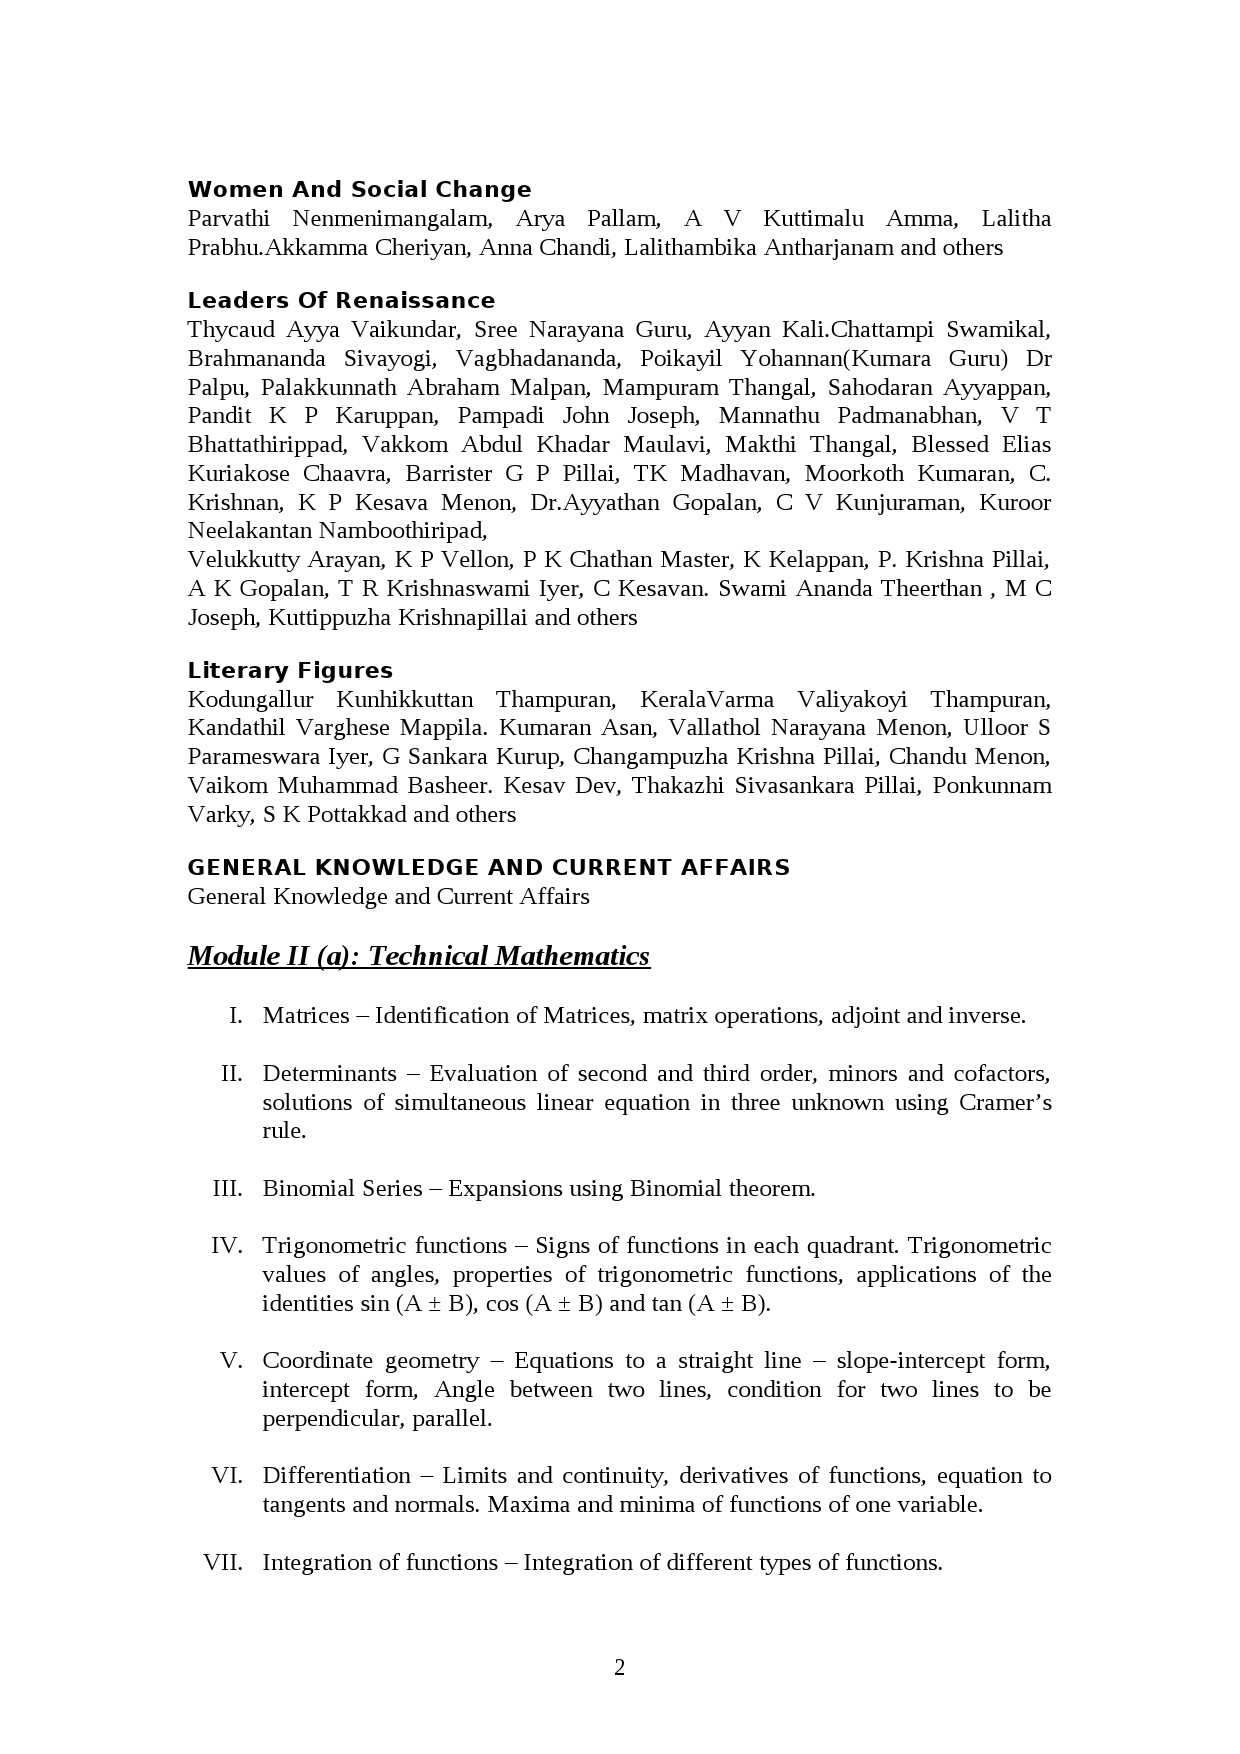 Chemical Engineering Lecturer in Polytechnic Exam Syllabus - Notification Image 2